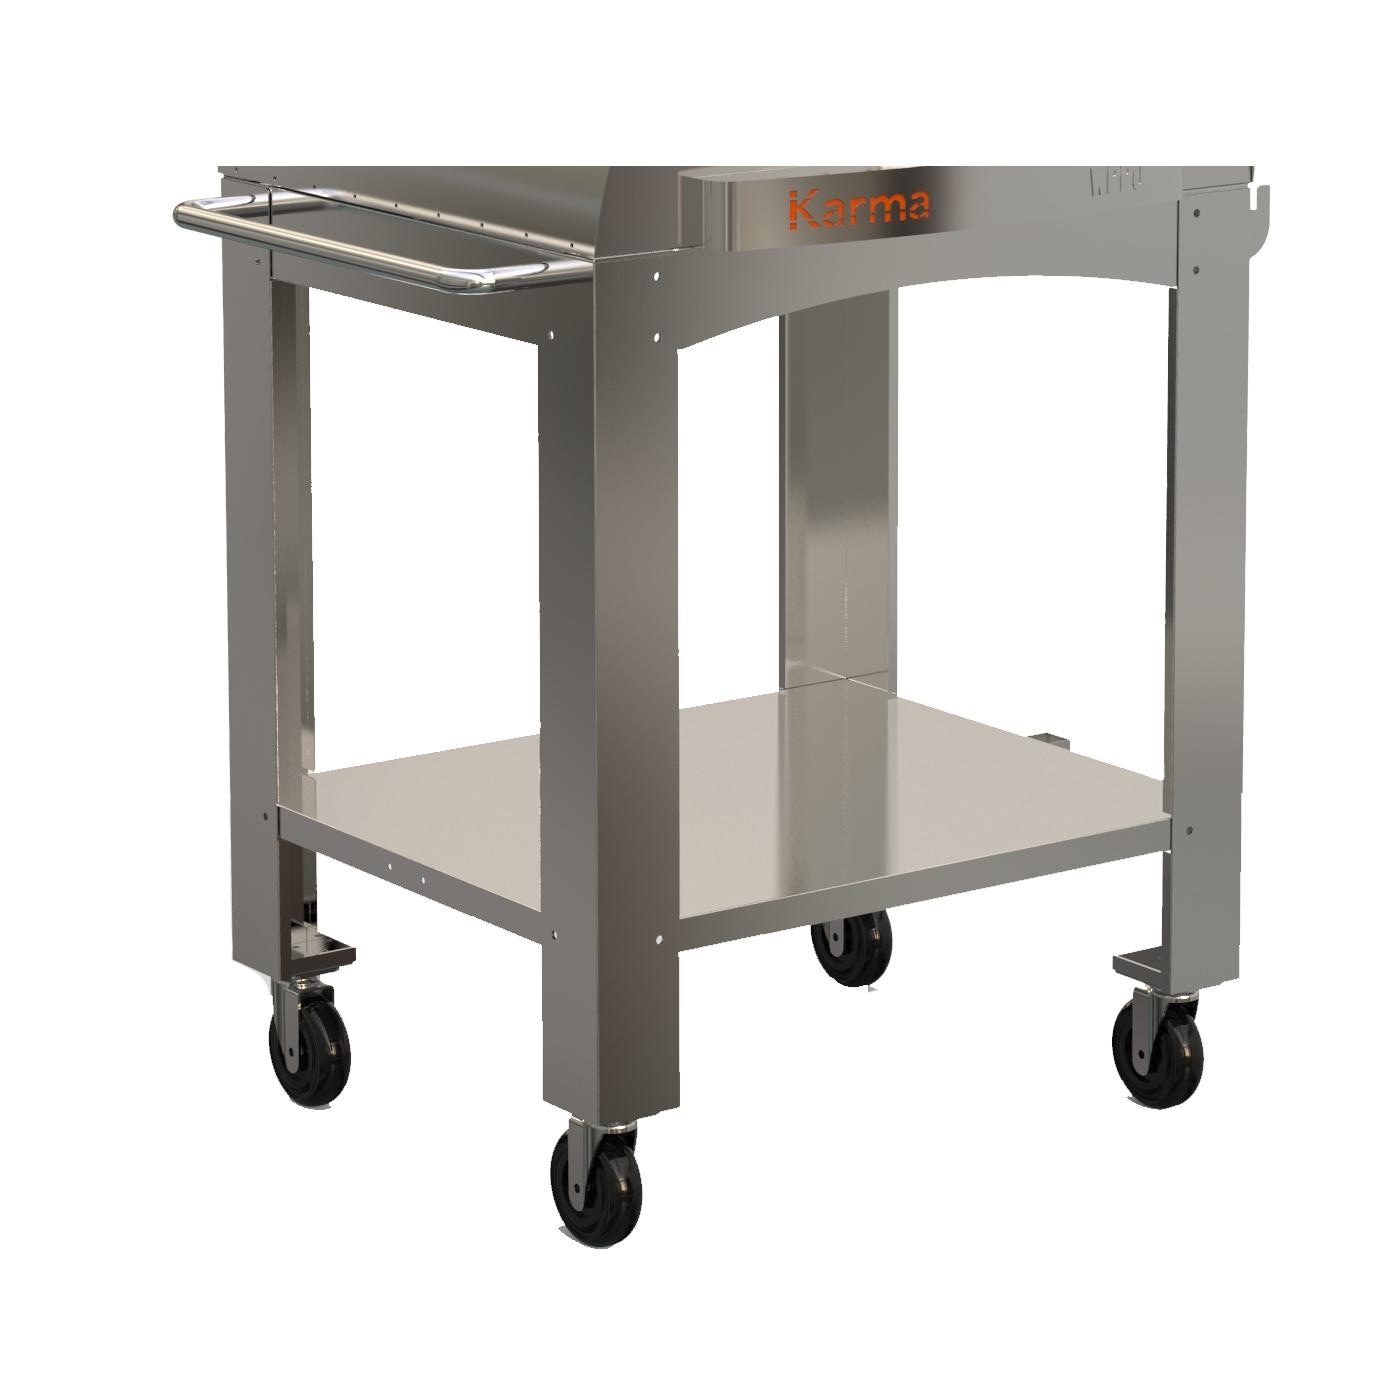 Main image of the WPPO™ Karma 32 Optional Stainless Steel Base Cart (SKU: WKCT-2S) with a solid white background